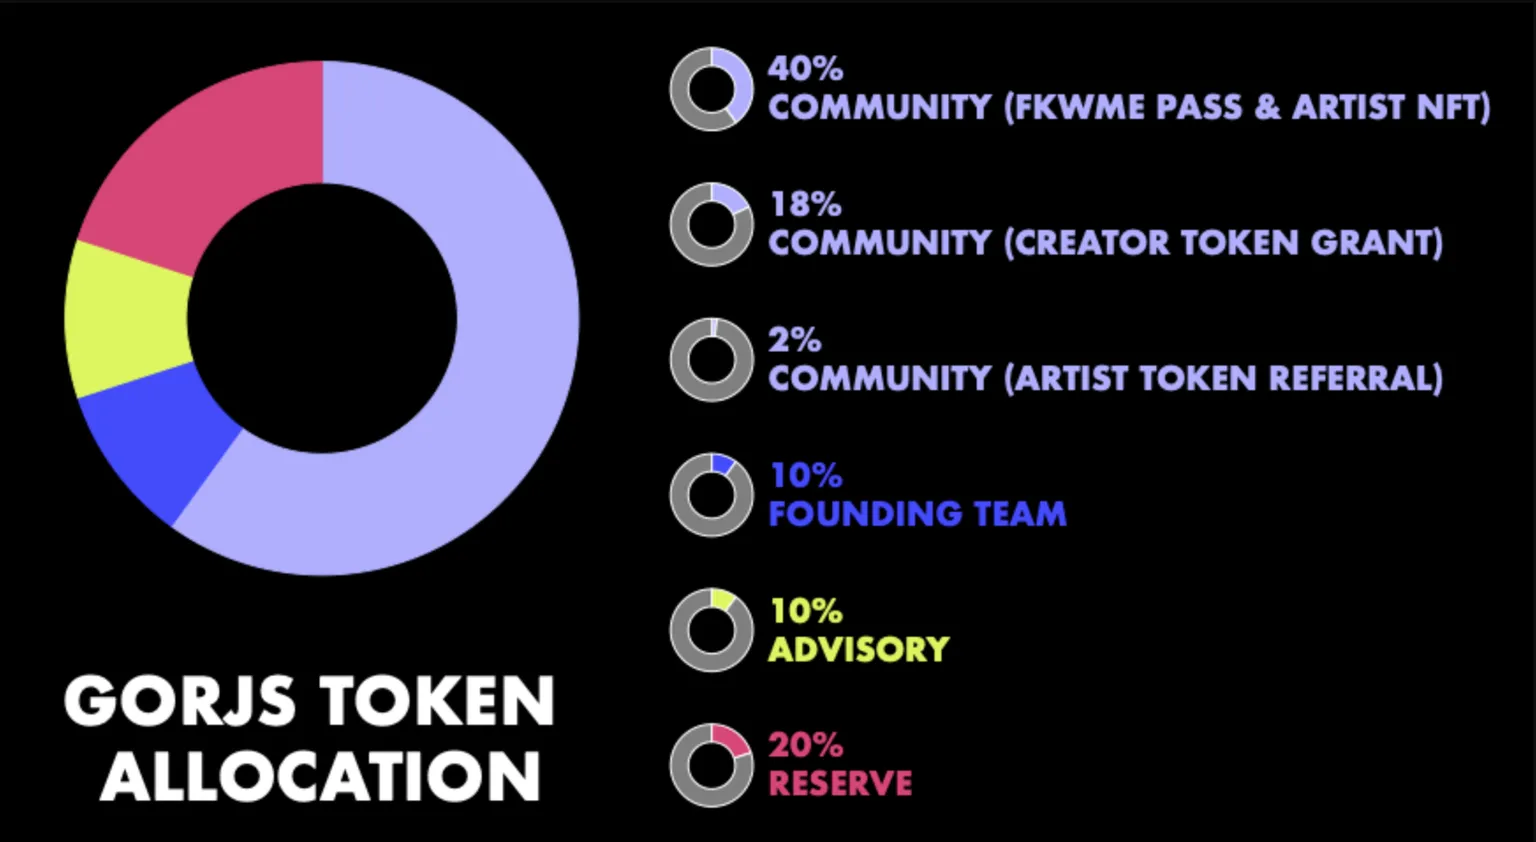 Image of a circular chart showing the GORGJS DAO's token allocation. 40% of tokens going to 